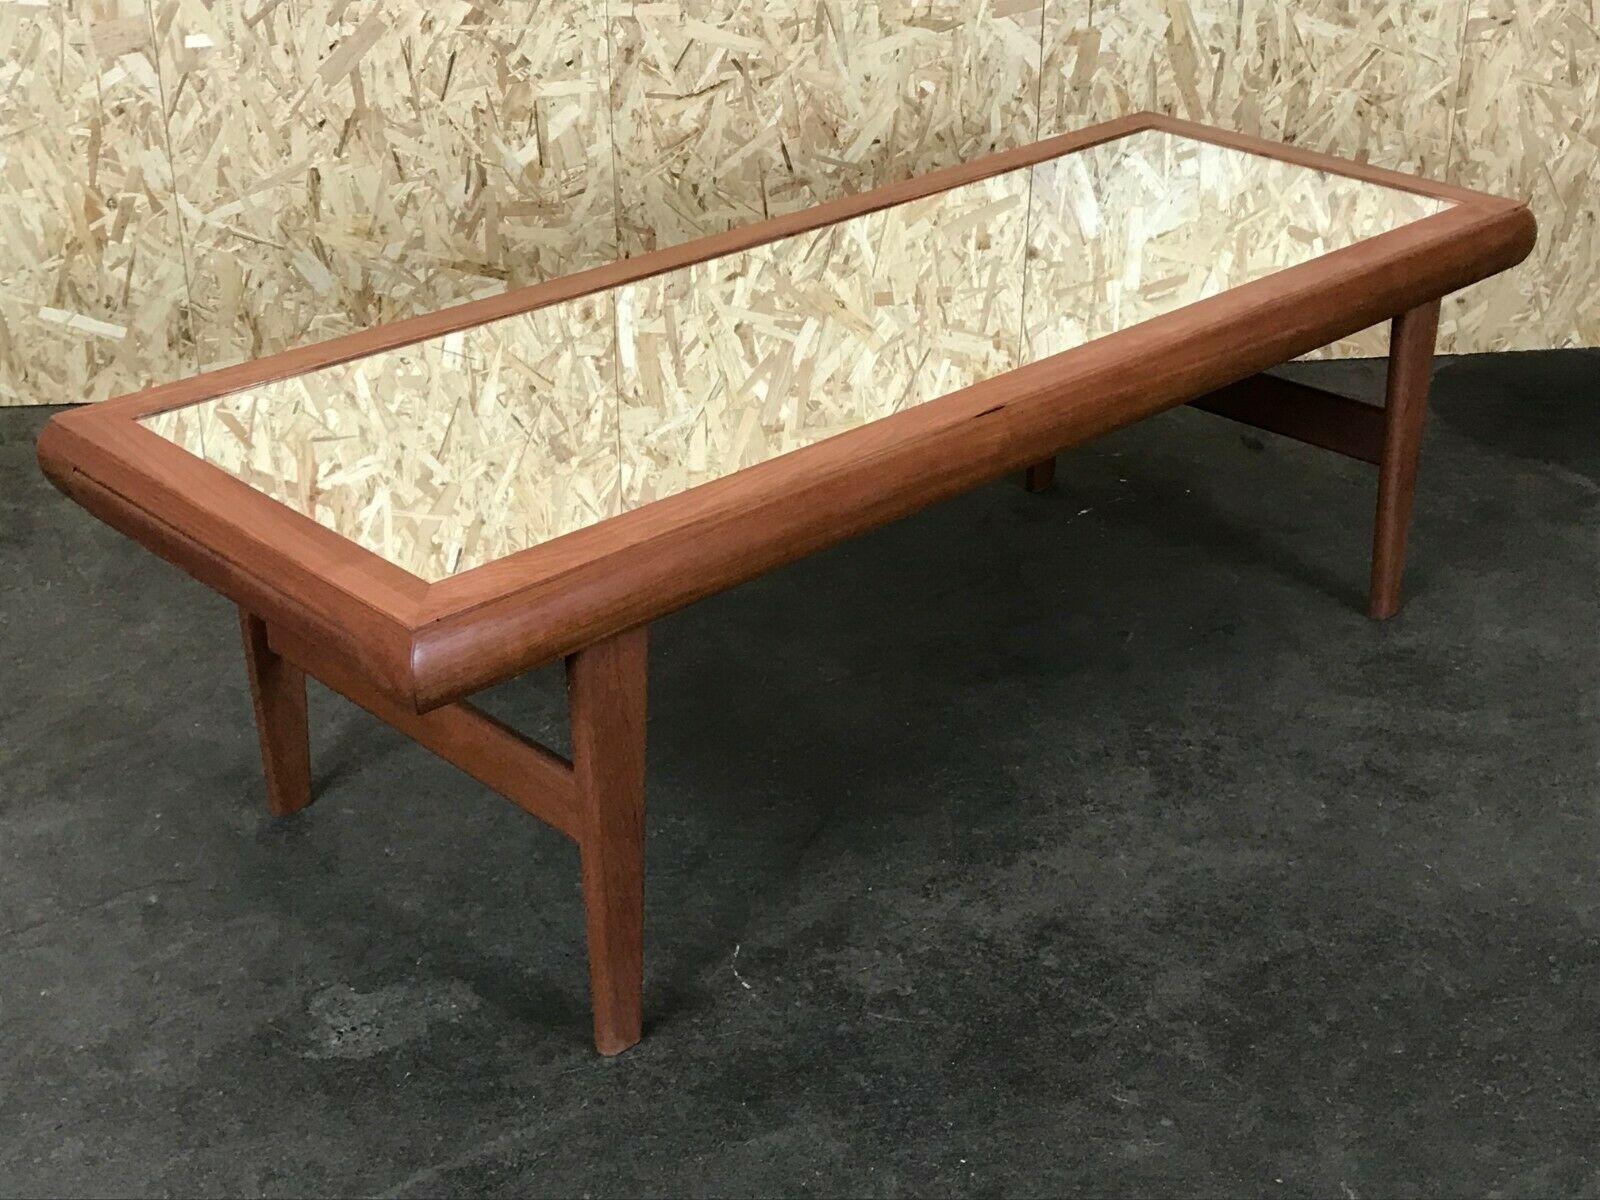 60s 70s Teak Table Coffee Table Danish Design with Mirror For Sale 7